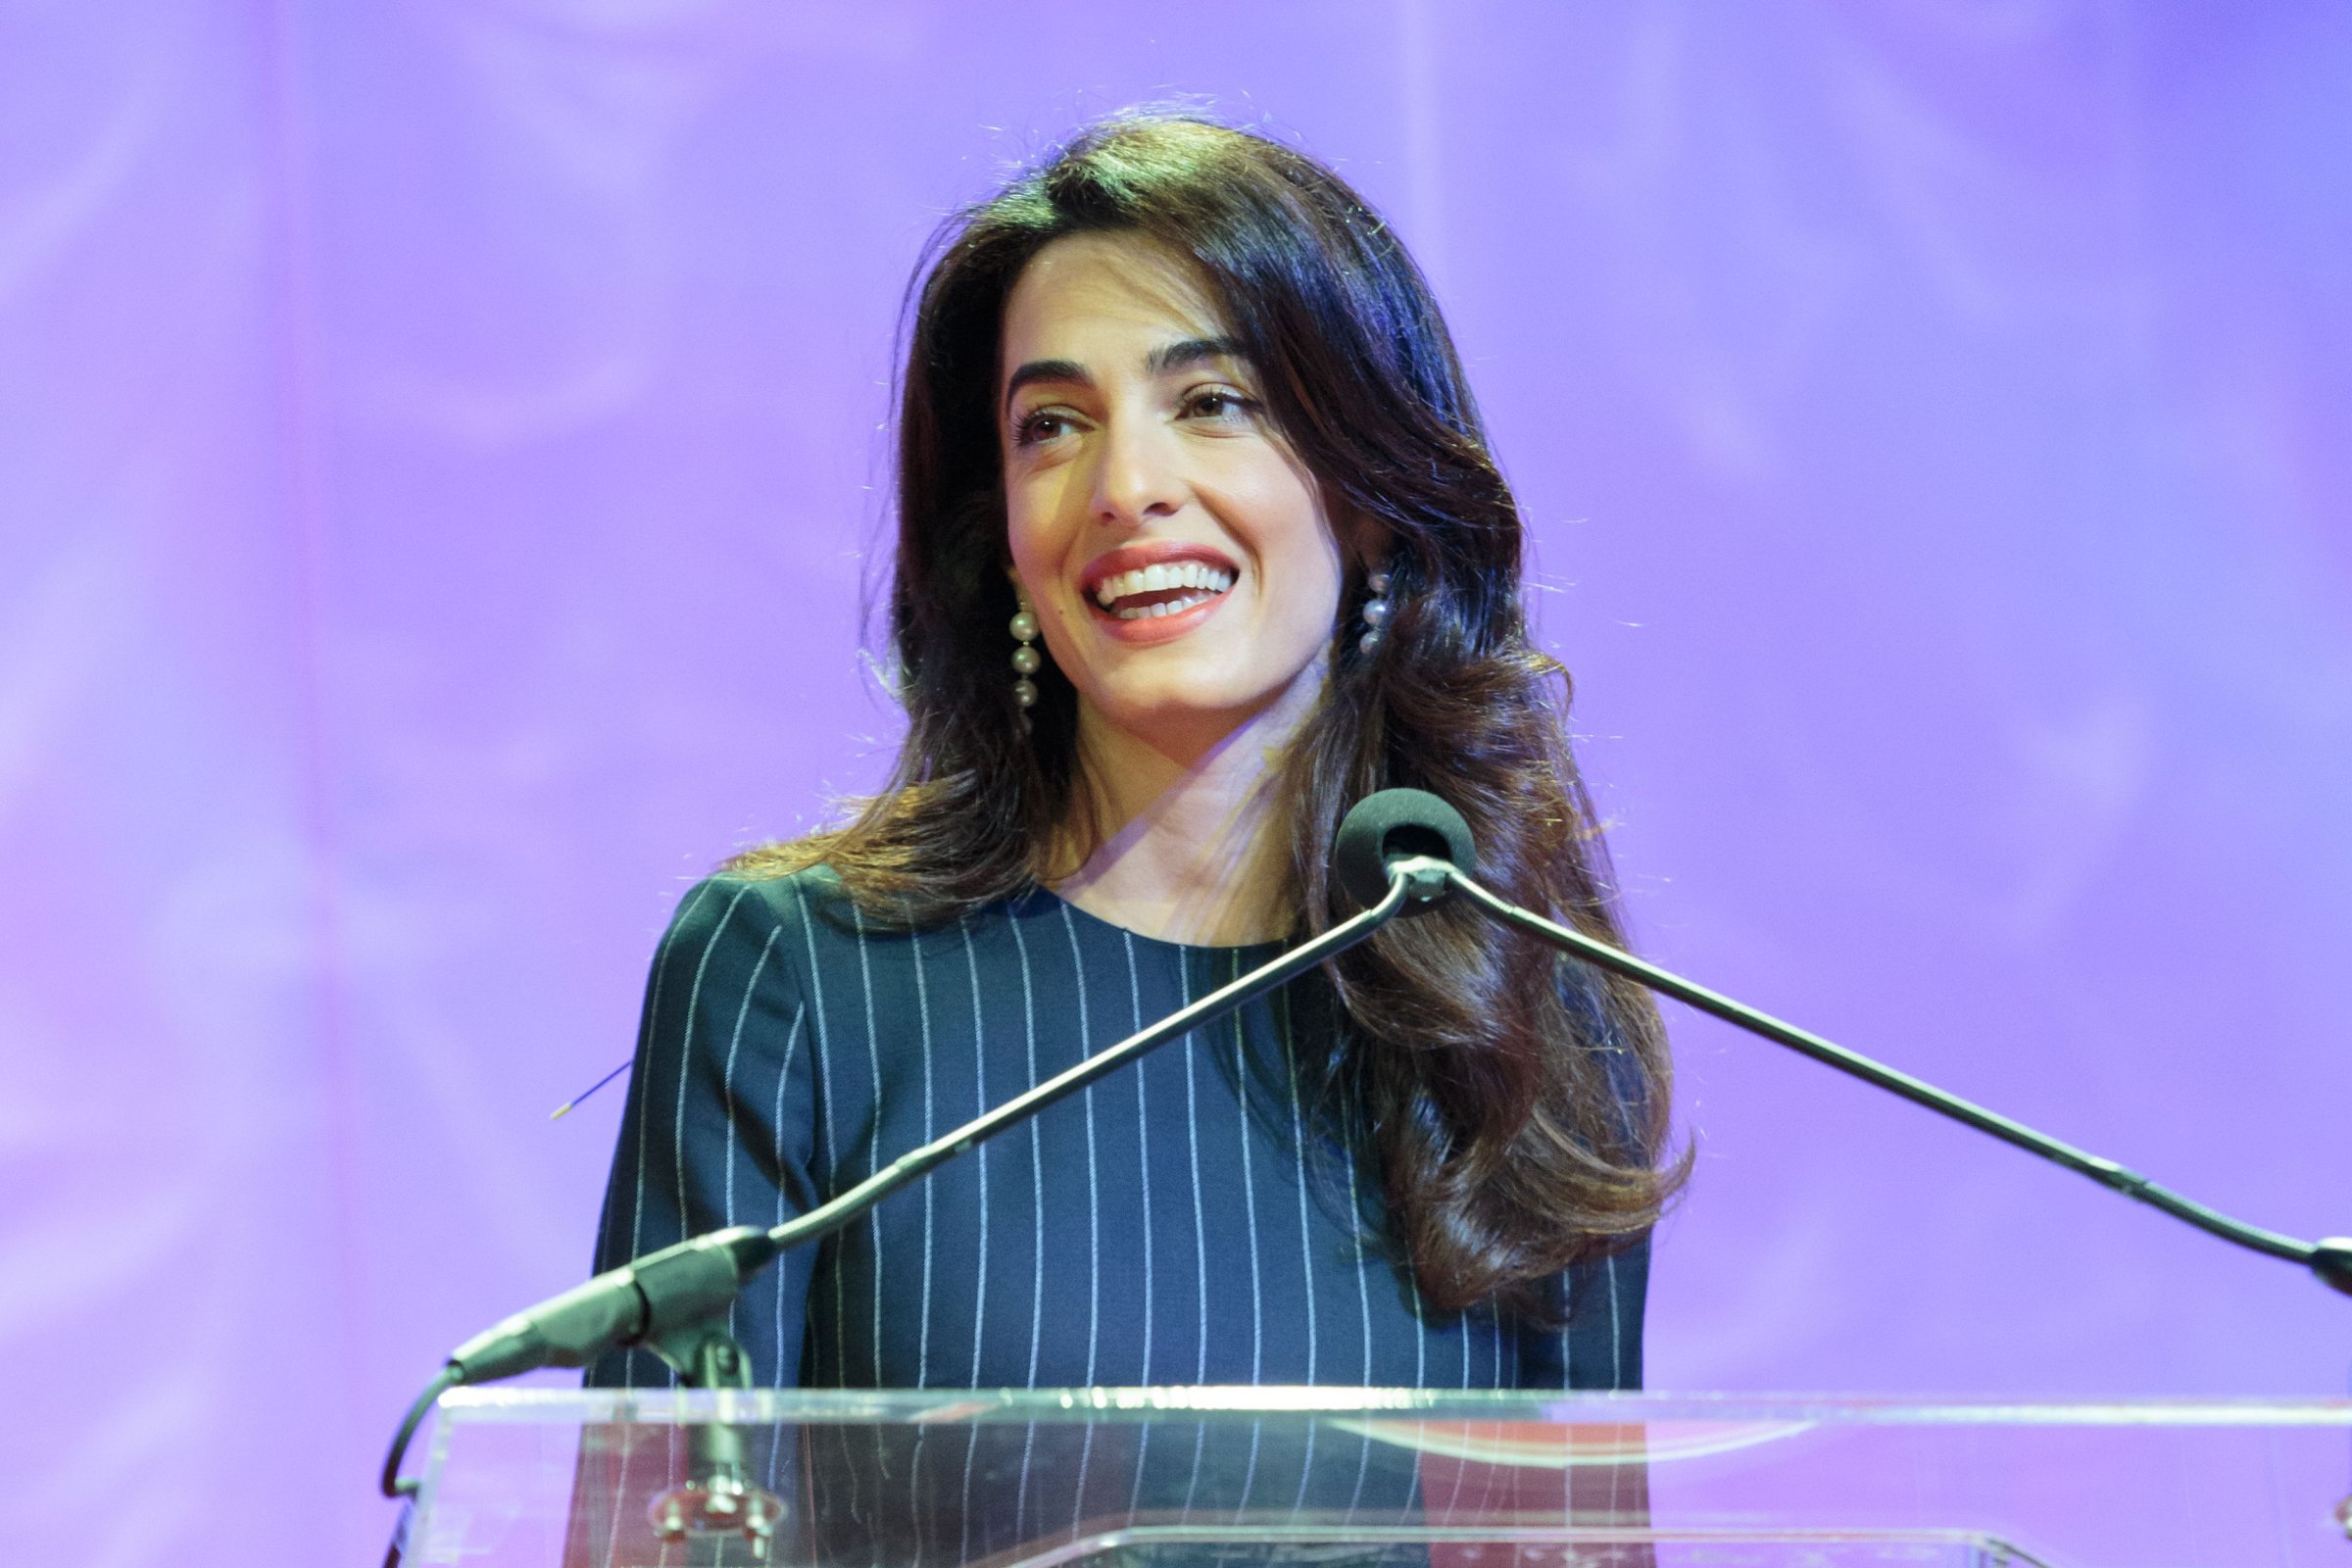 British human rights lawyer Amal Clooney addresses the Texas Conference for Women held at the Austin Convention Center on November 15, 2016 in Austin, Texas. / AFP / SUZANNE CORDEIRO (Photo credit should read SUZANNE CORDEIRO/AFP/Getty Images)